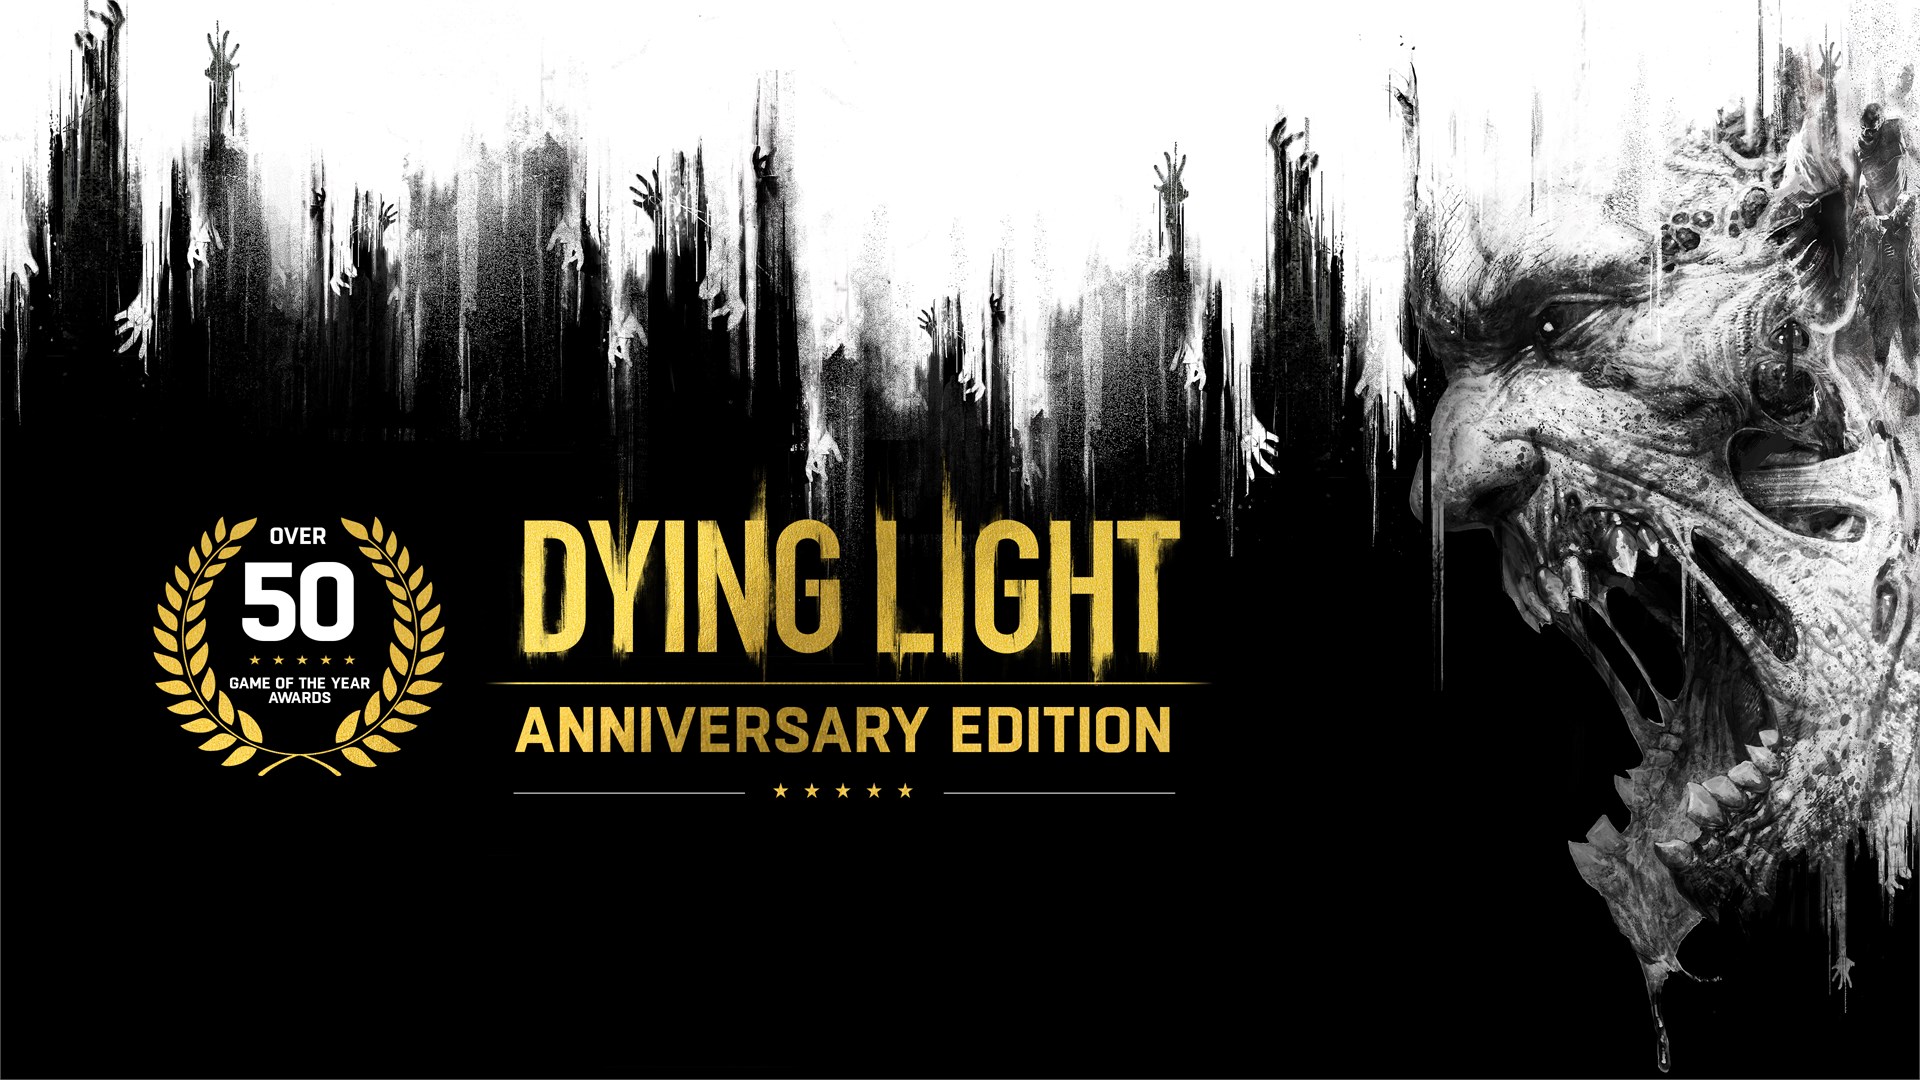 Dying Light Anniversary Edition for PS4, Xbox One launches December 8 -  Gematsu